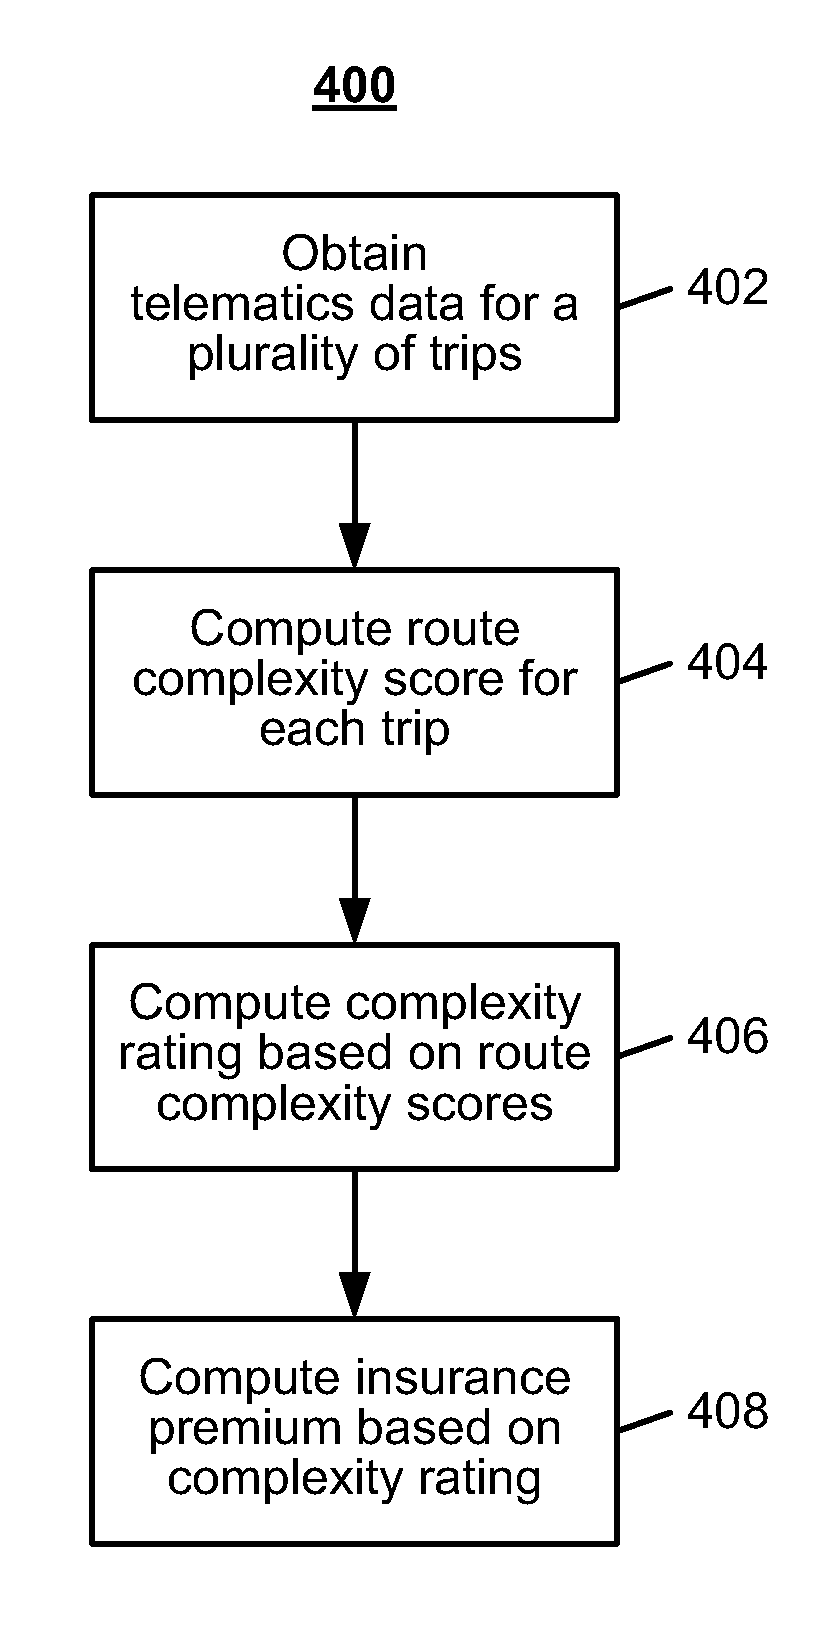 System and method for computing and scoring the complexity of a vehicle trip using geo-spatial information